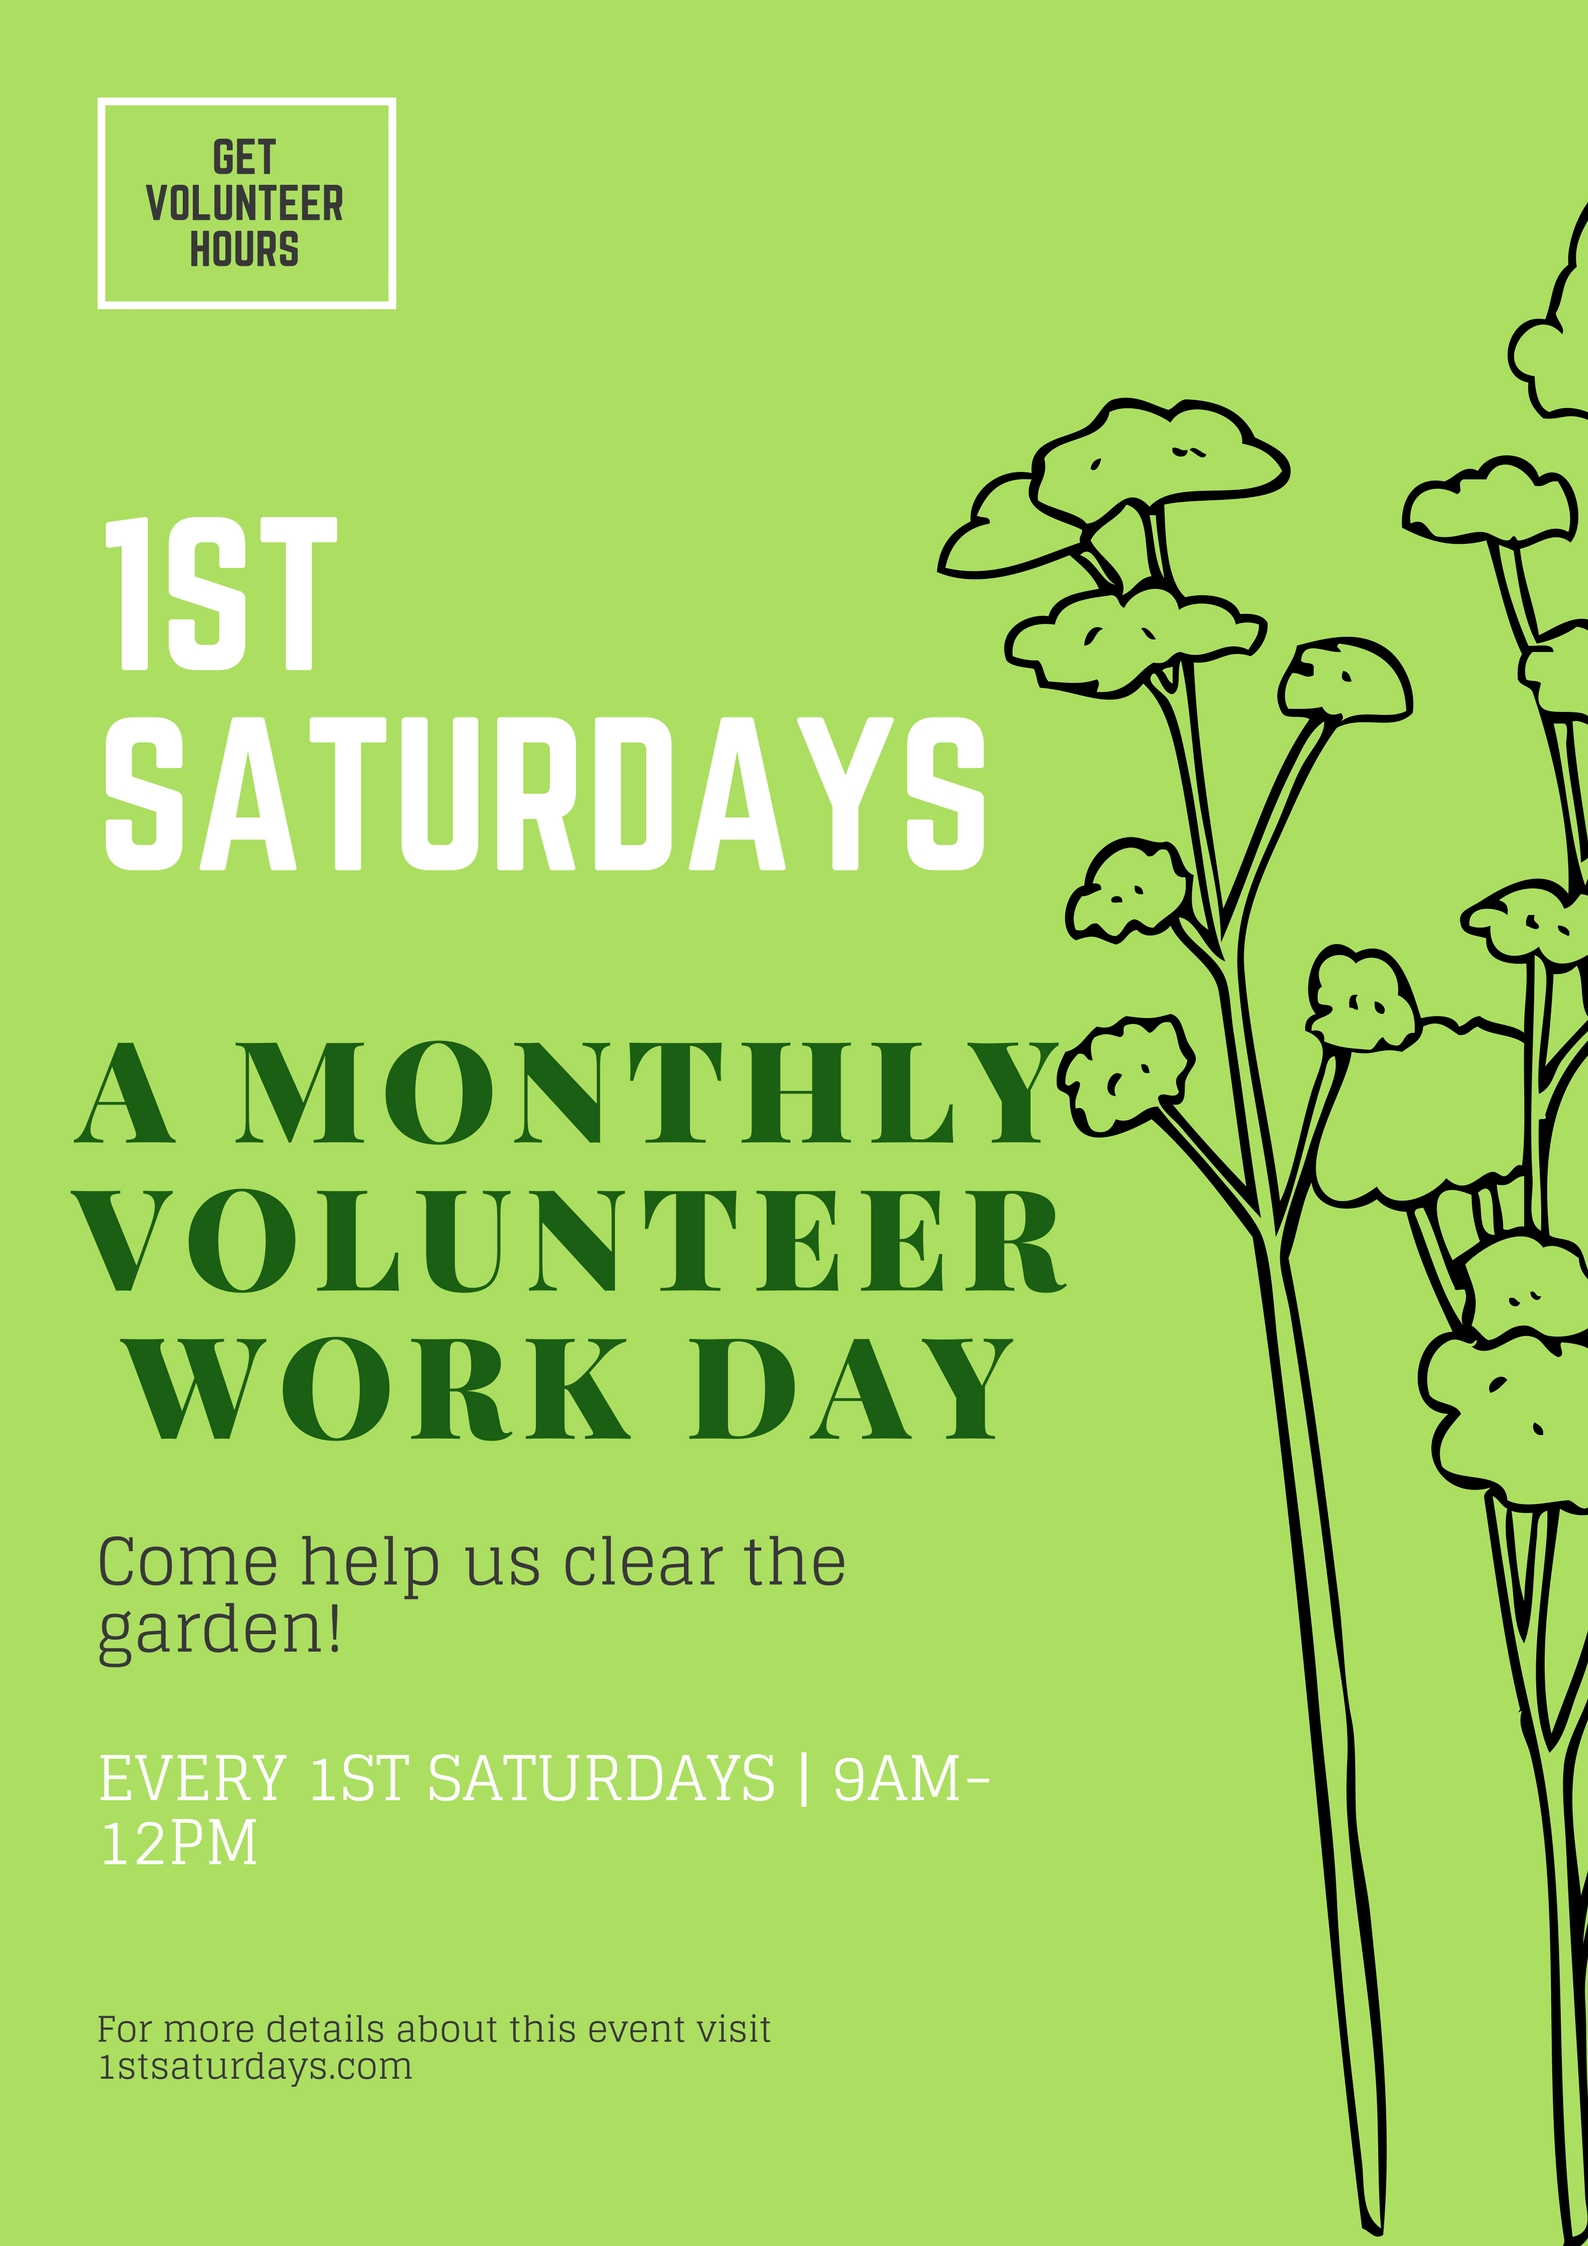 Save the 1st Saturdays of each month to volunteer at your school